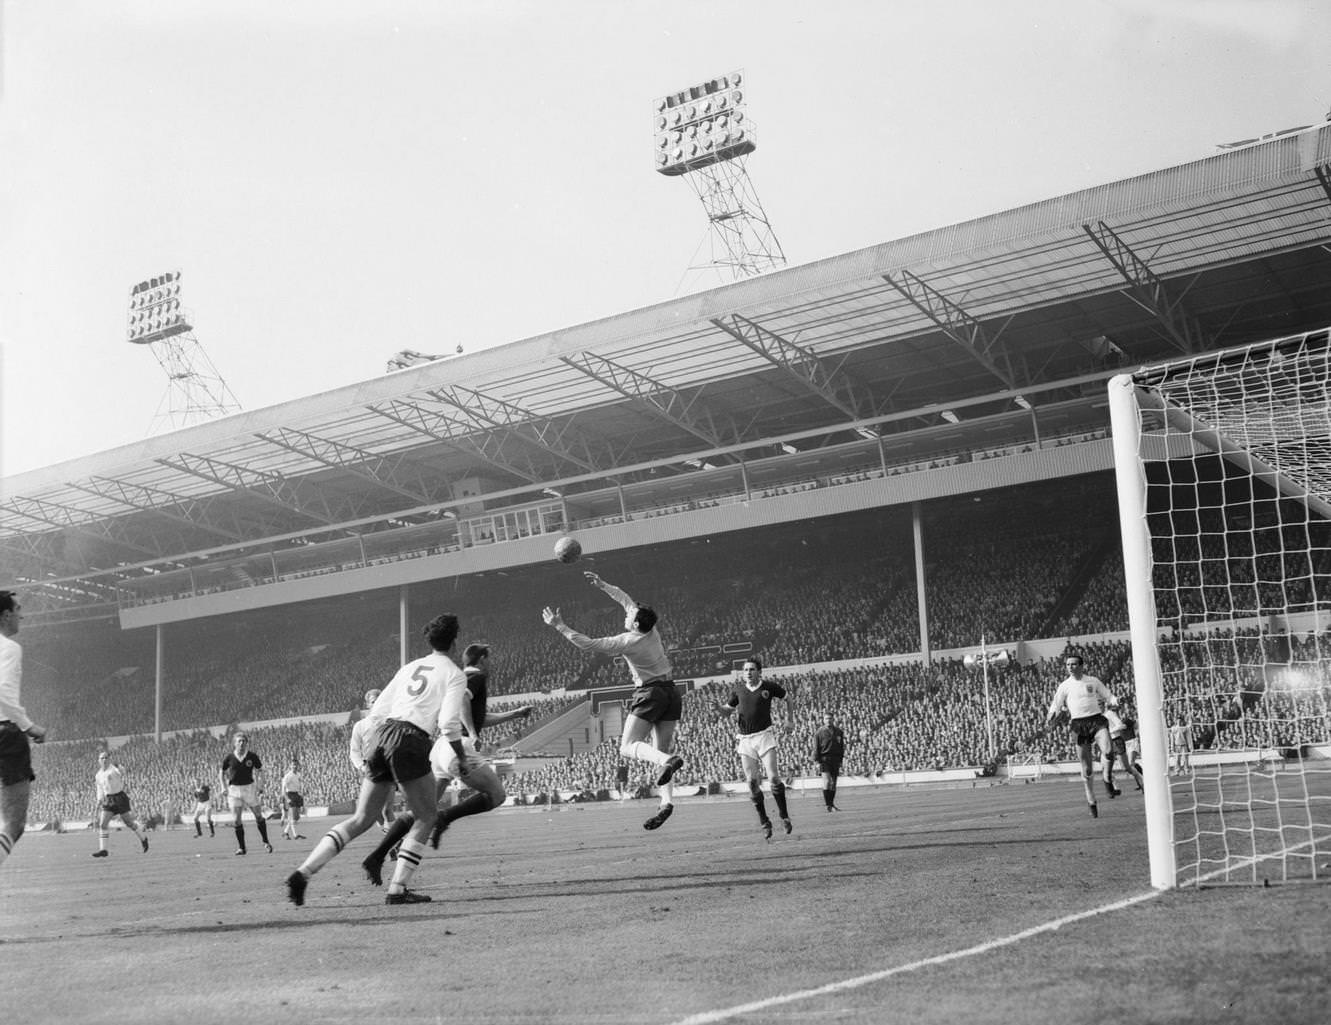 England goalkeeper Gordon Banks and centre-half Maurice Norman (No.5) beat off an attack by Scotland centre-forward Ian St John (behind Norman) during the soccer international at Wembley, 1963